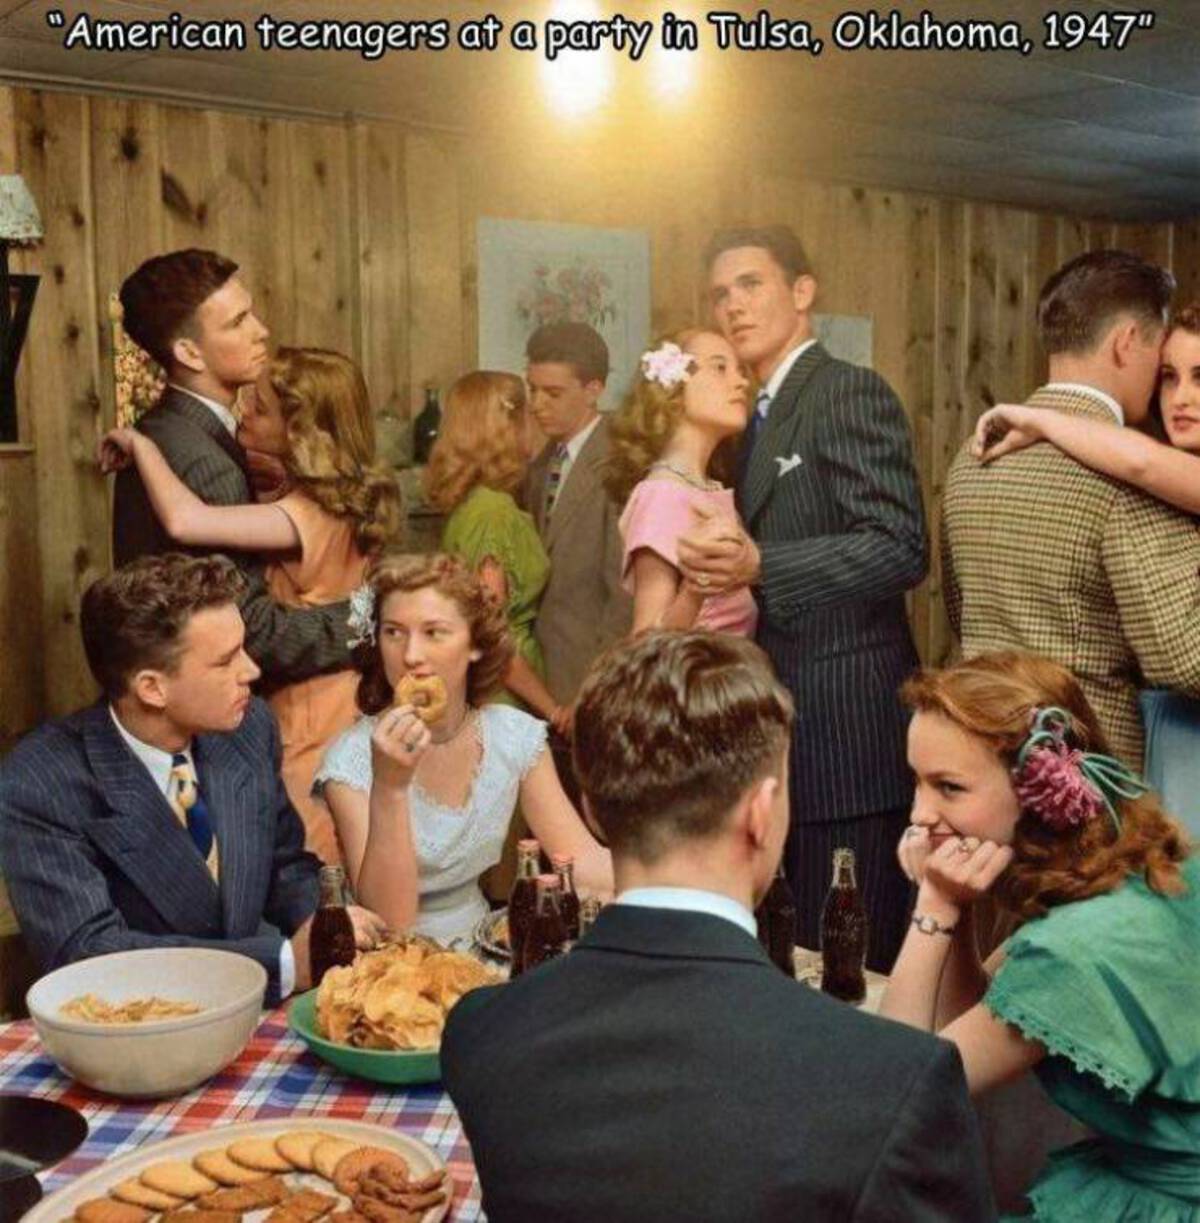 teenagers at a party in tulsa oklahoma 1947 - "American teenagers at a party in Tulsa, Oklahoma, 1947"